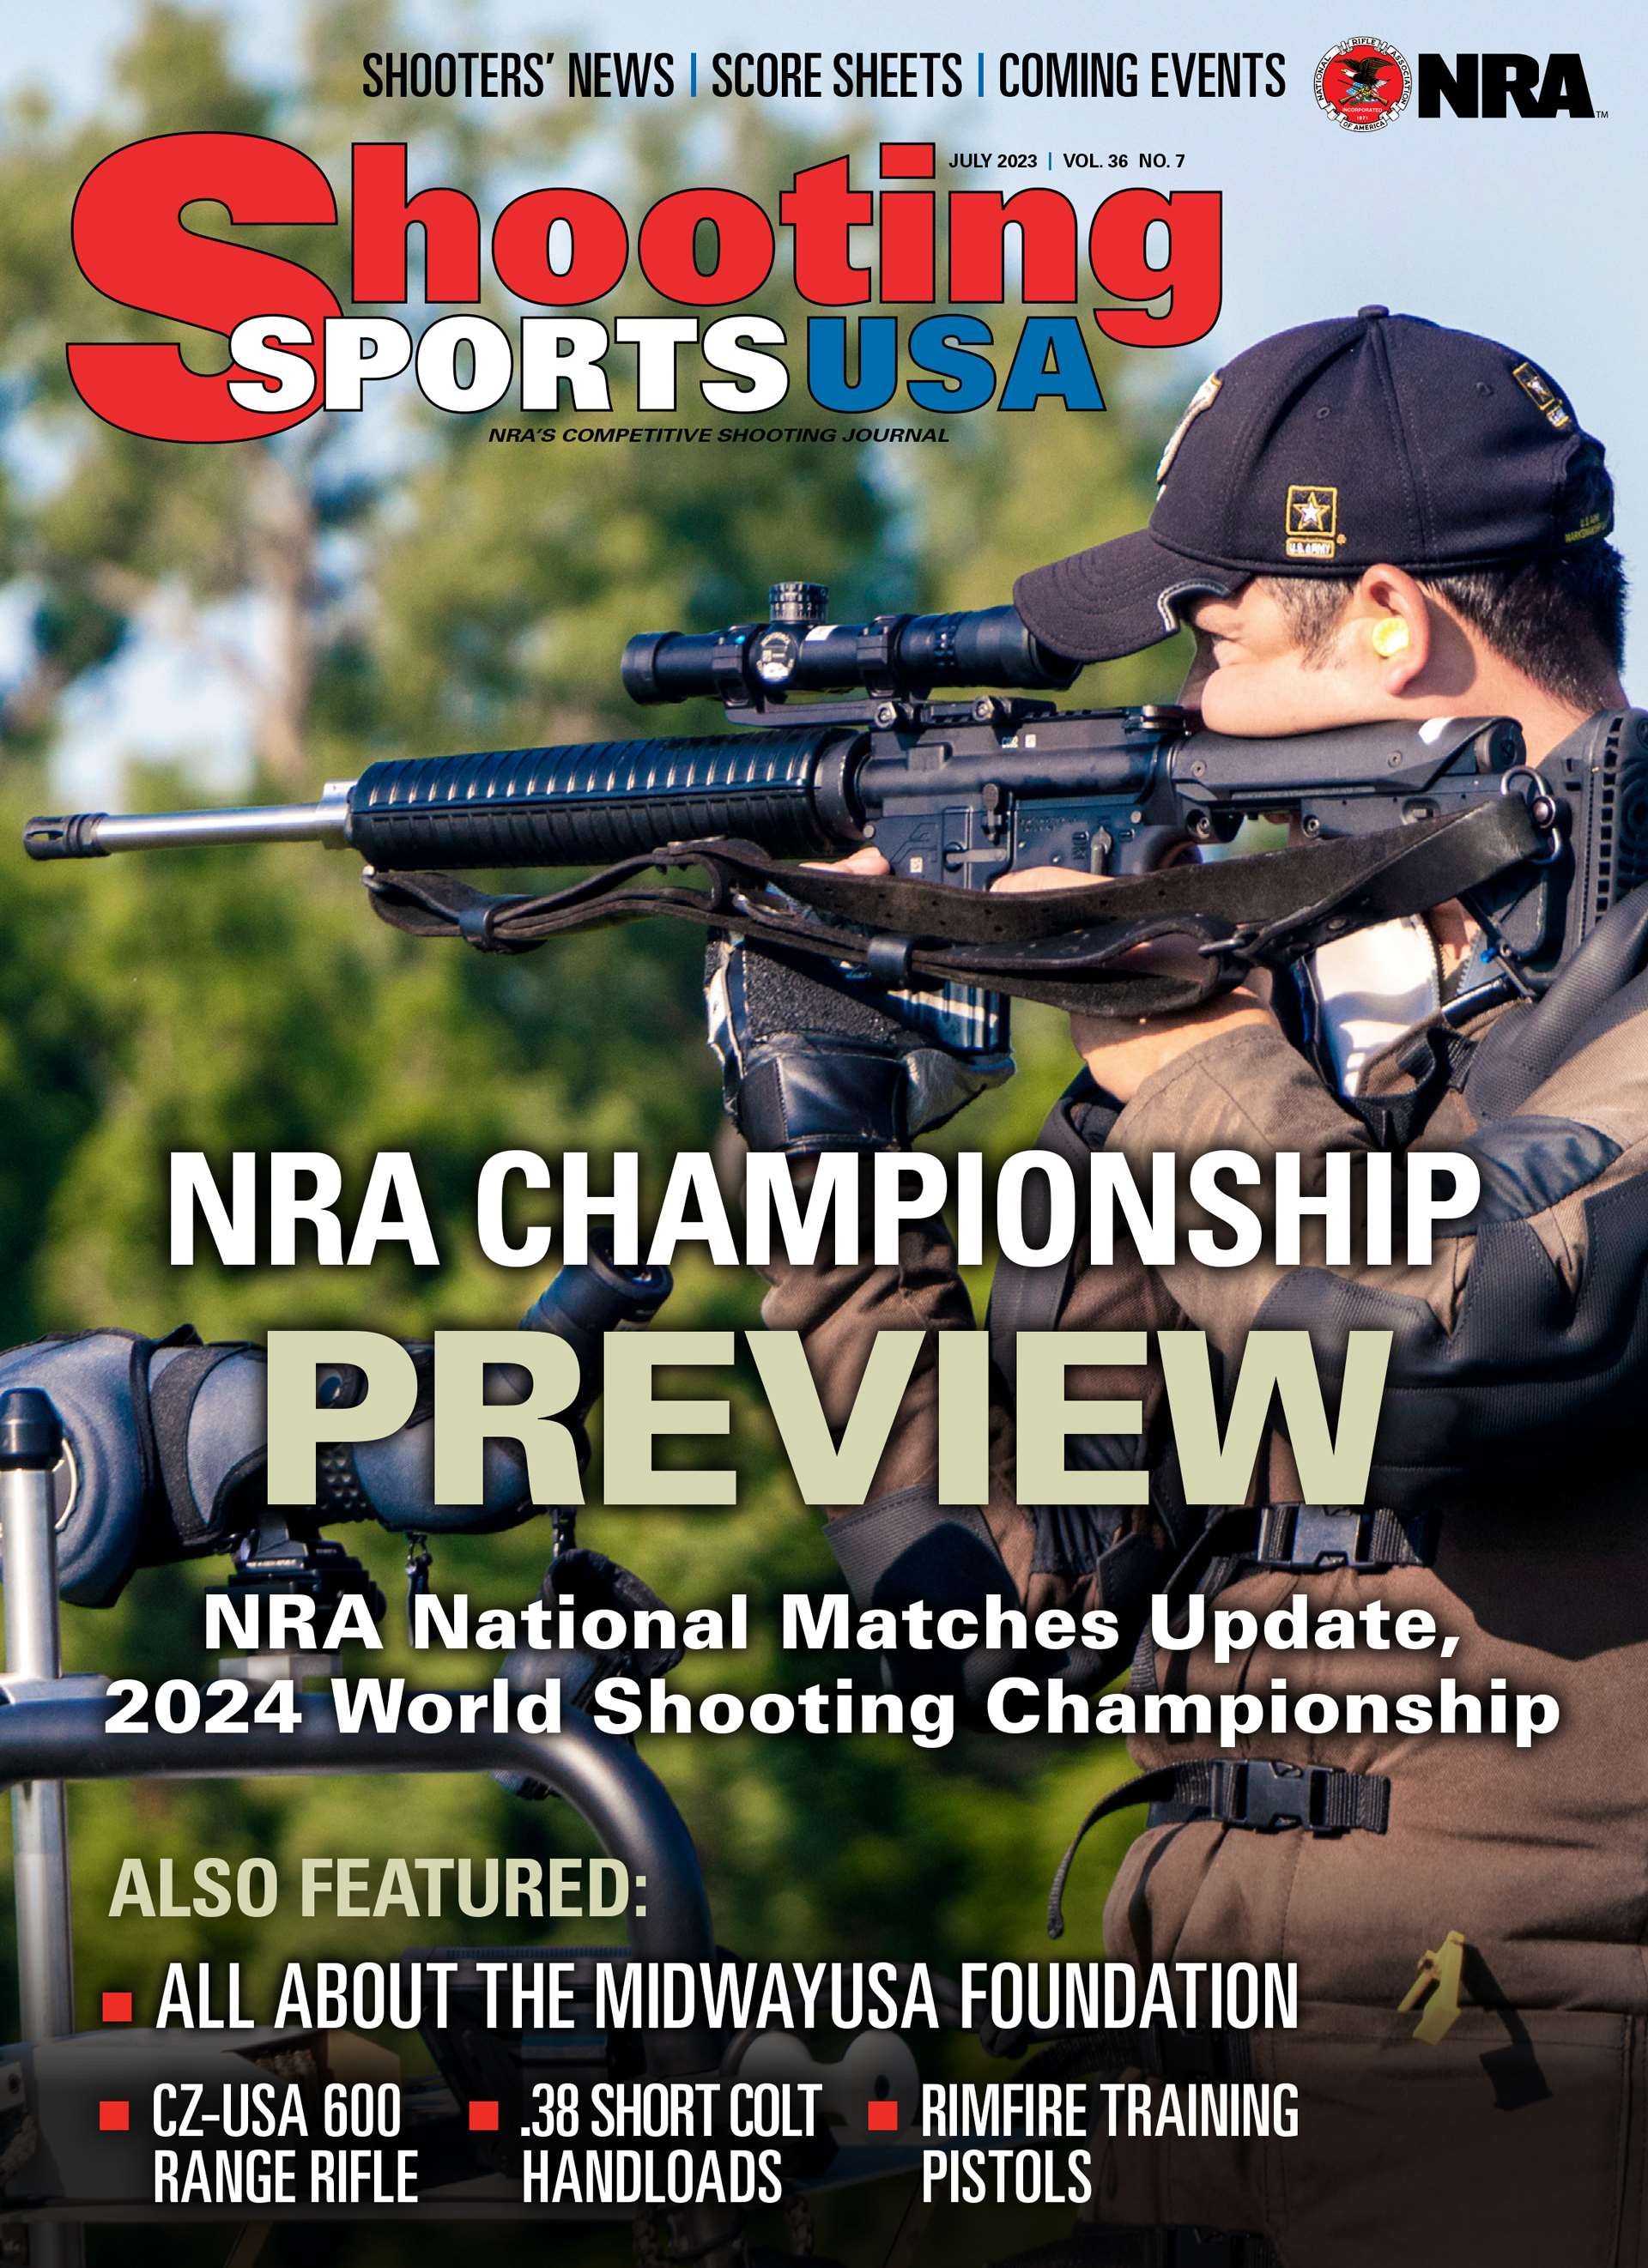 2023 NRA National Matches and 2024 NRA World Shooting Championship Update